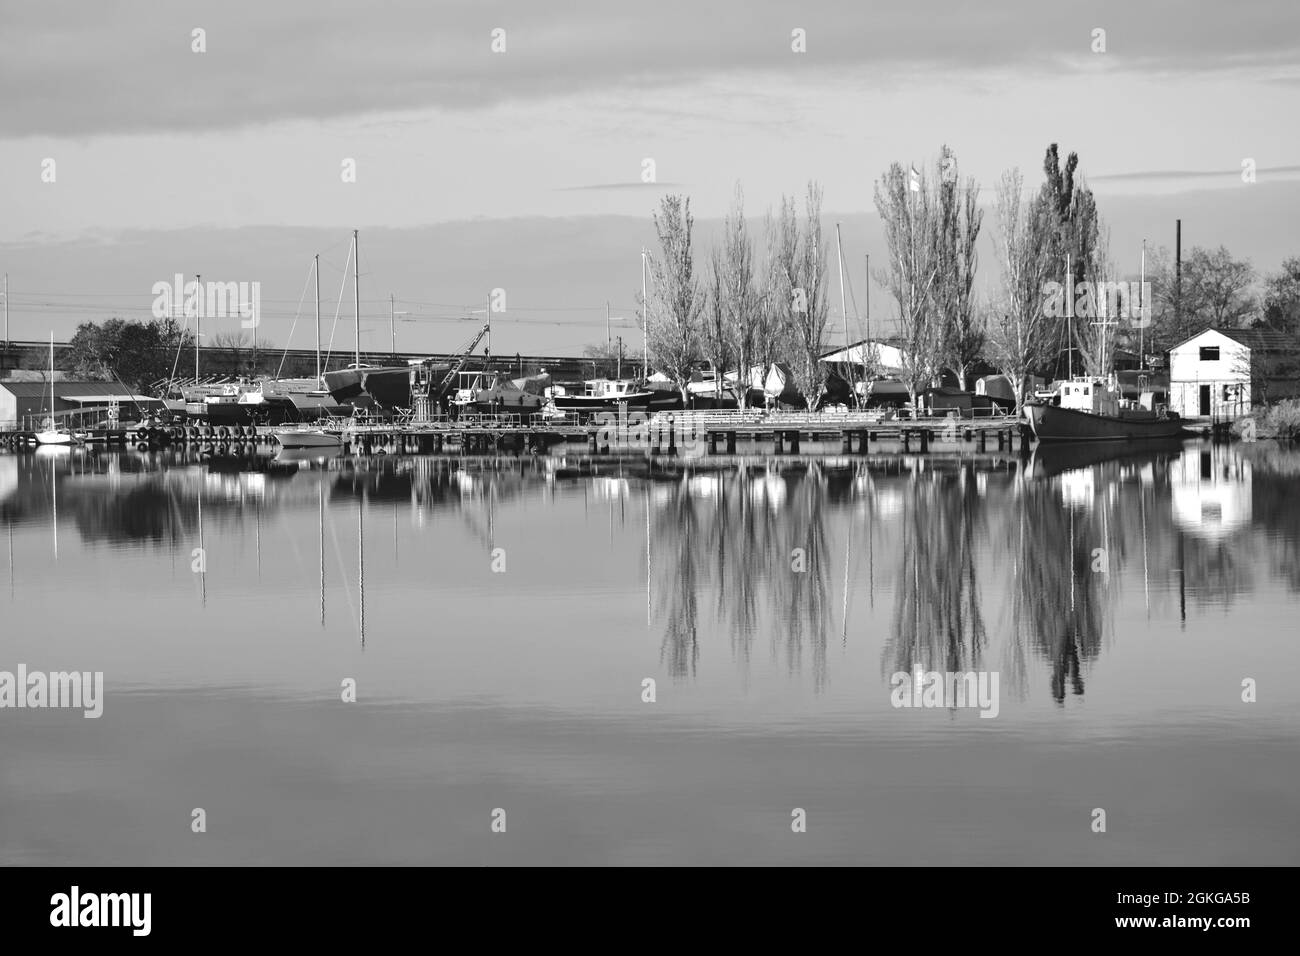 Black and white picture. Autumn reflections at river.Beautiful landscape with trees and boats at the river Stock Photo